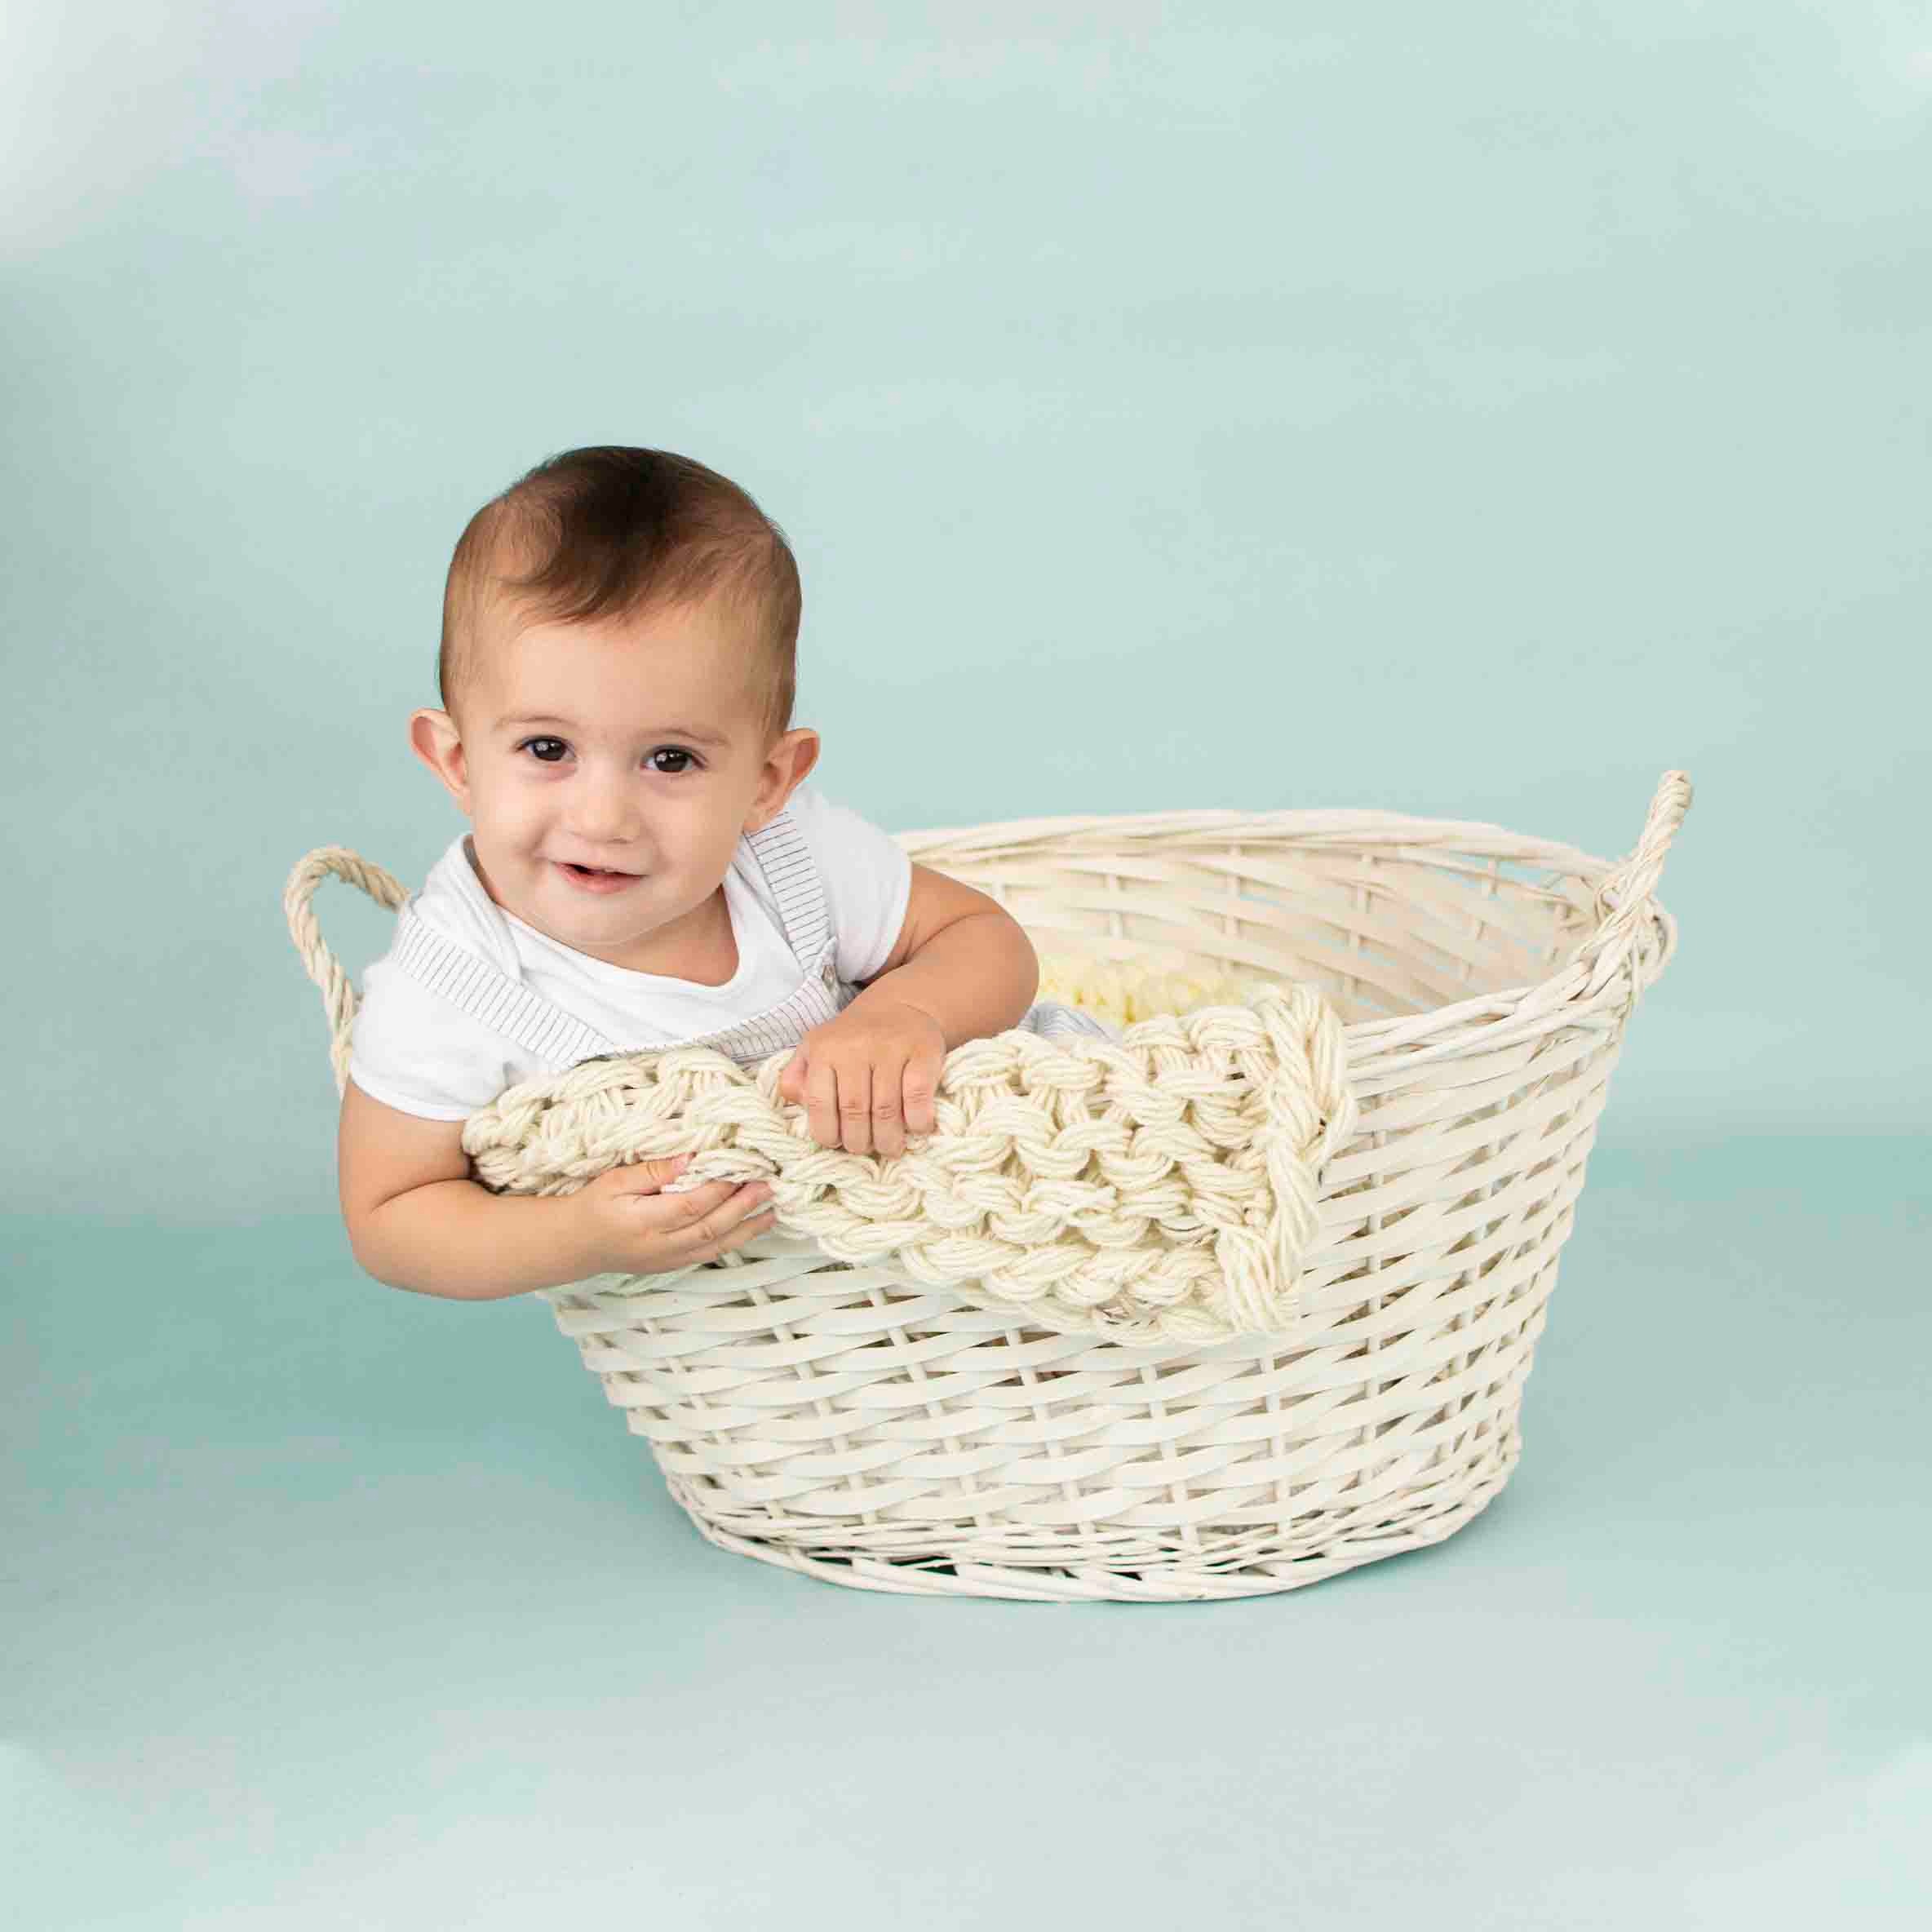 premium  package sitter baby photography